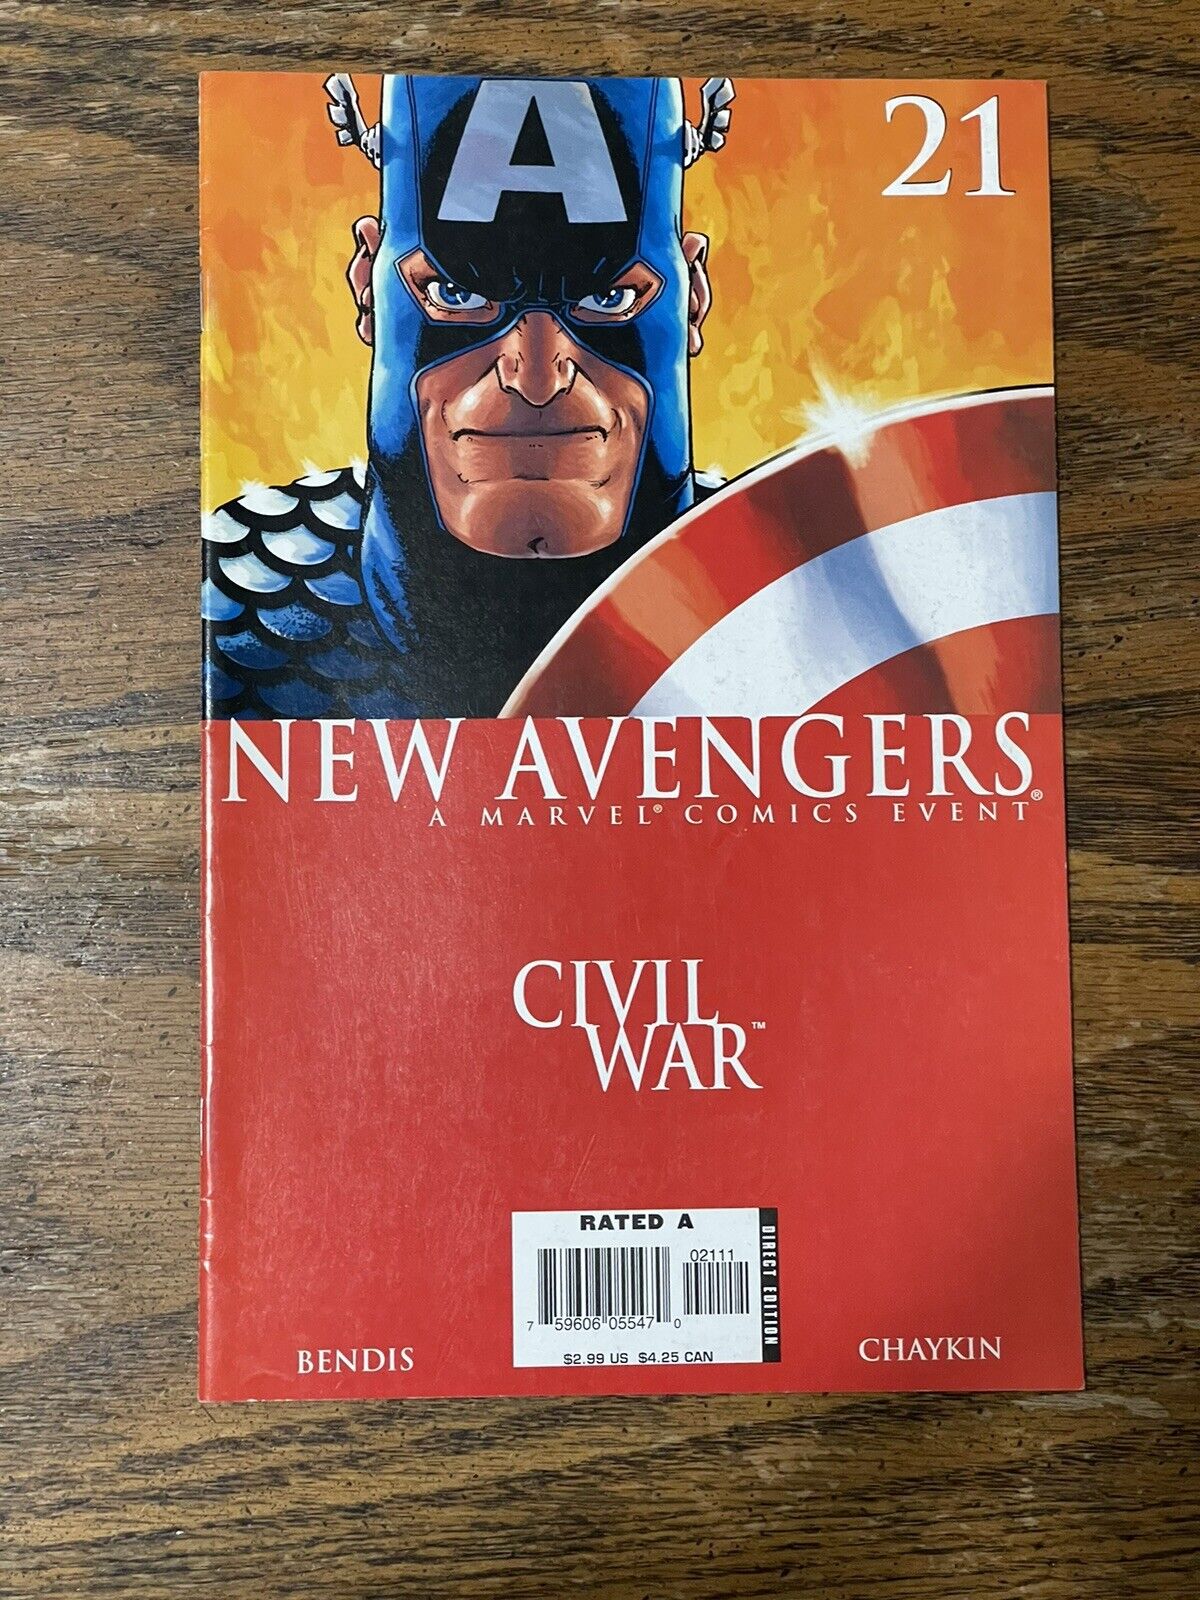 New Avengers #21 Civil War 2006. COMBINED SHIPPING